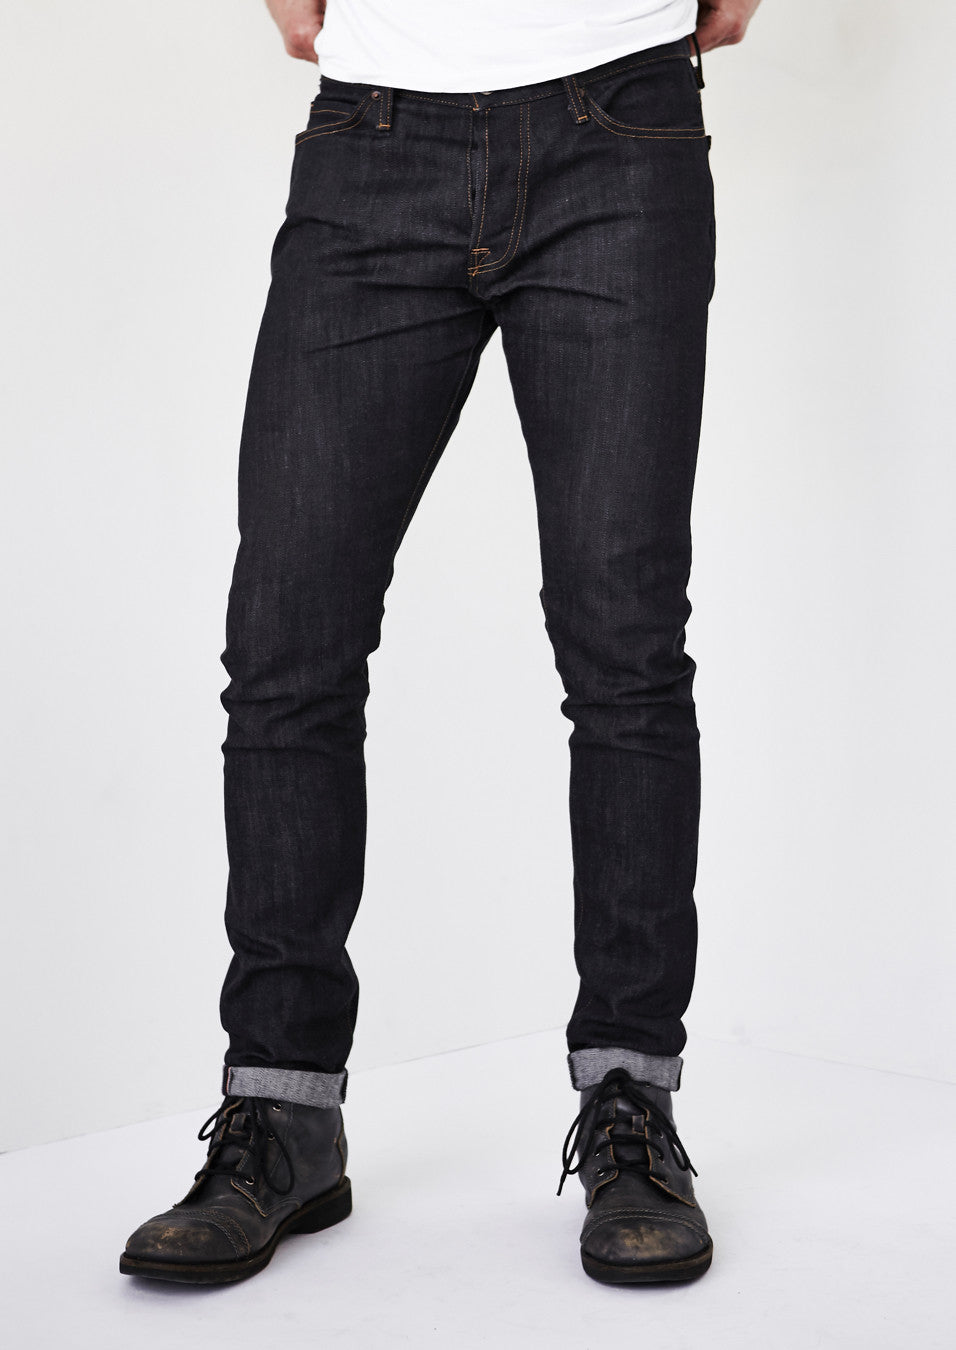 The Jameson in Selvage - Denim Collective in Loyal USA Made Premium 